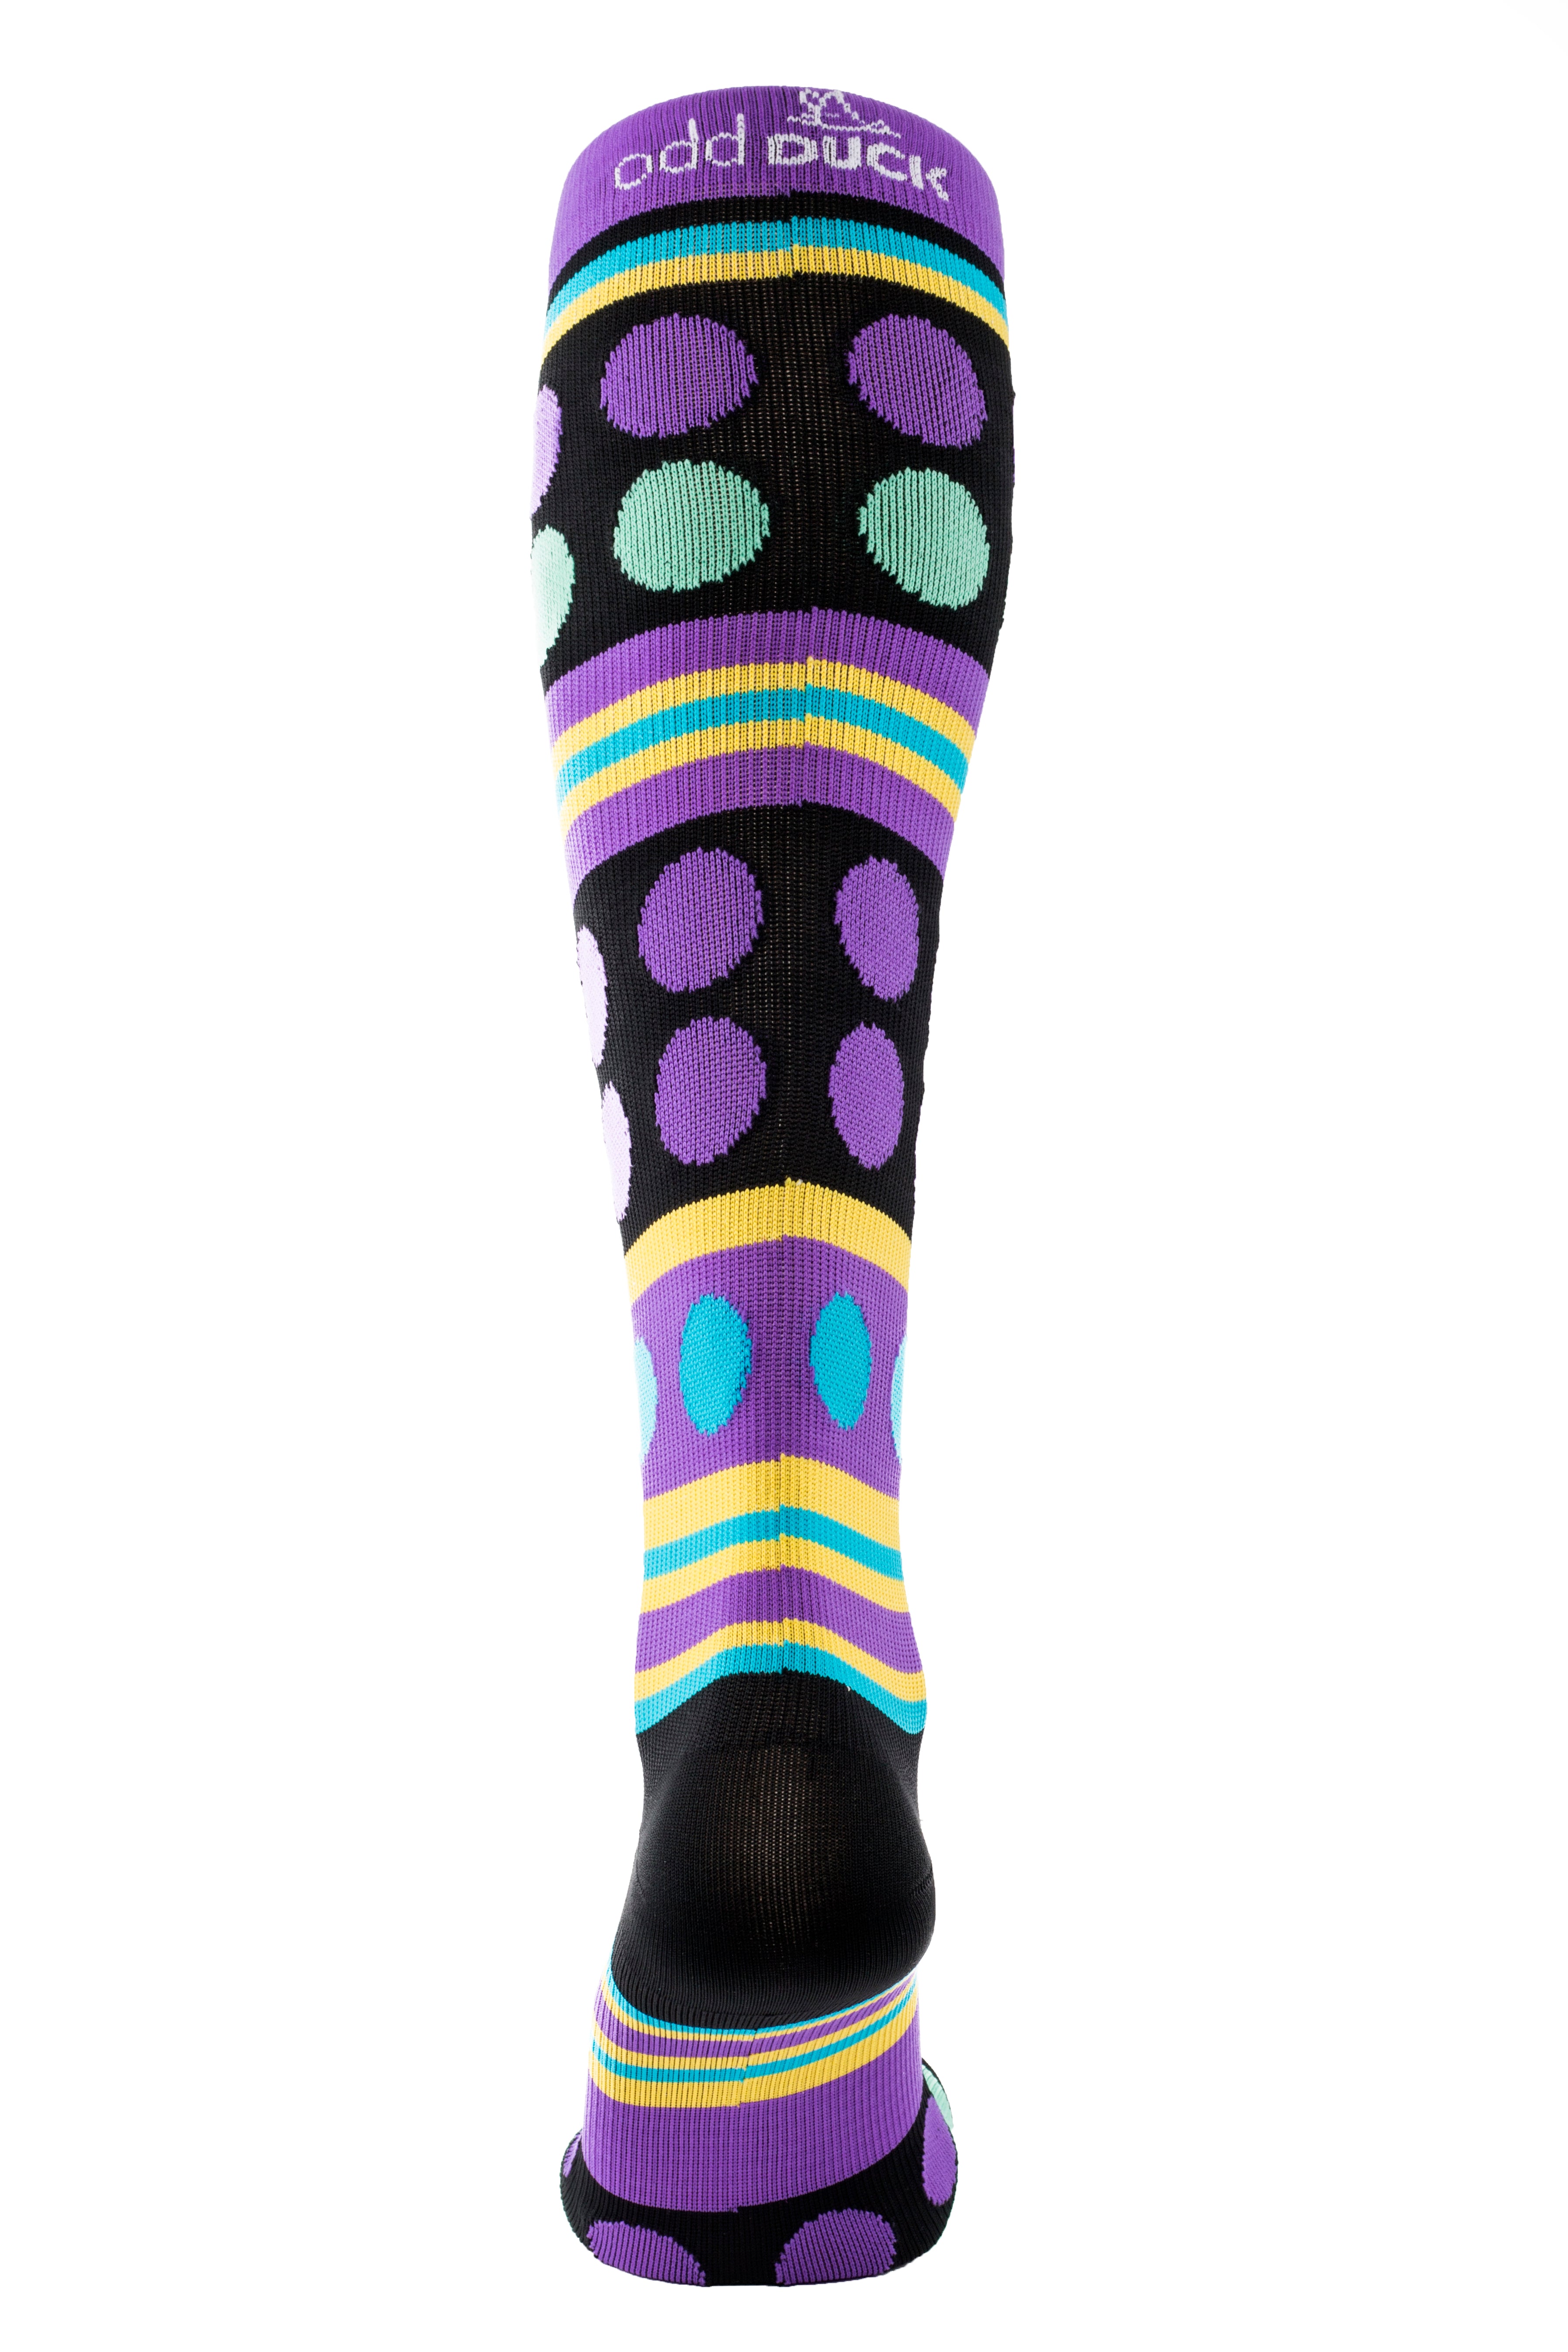 Funky purple, black and blue dotted compression sock available in Canada. Back view.